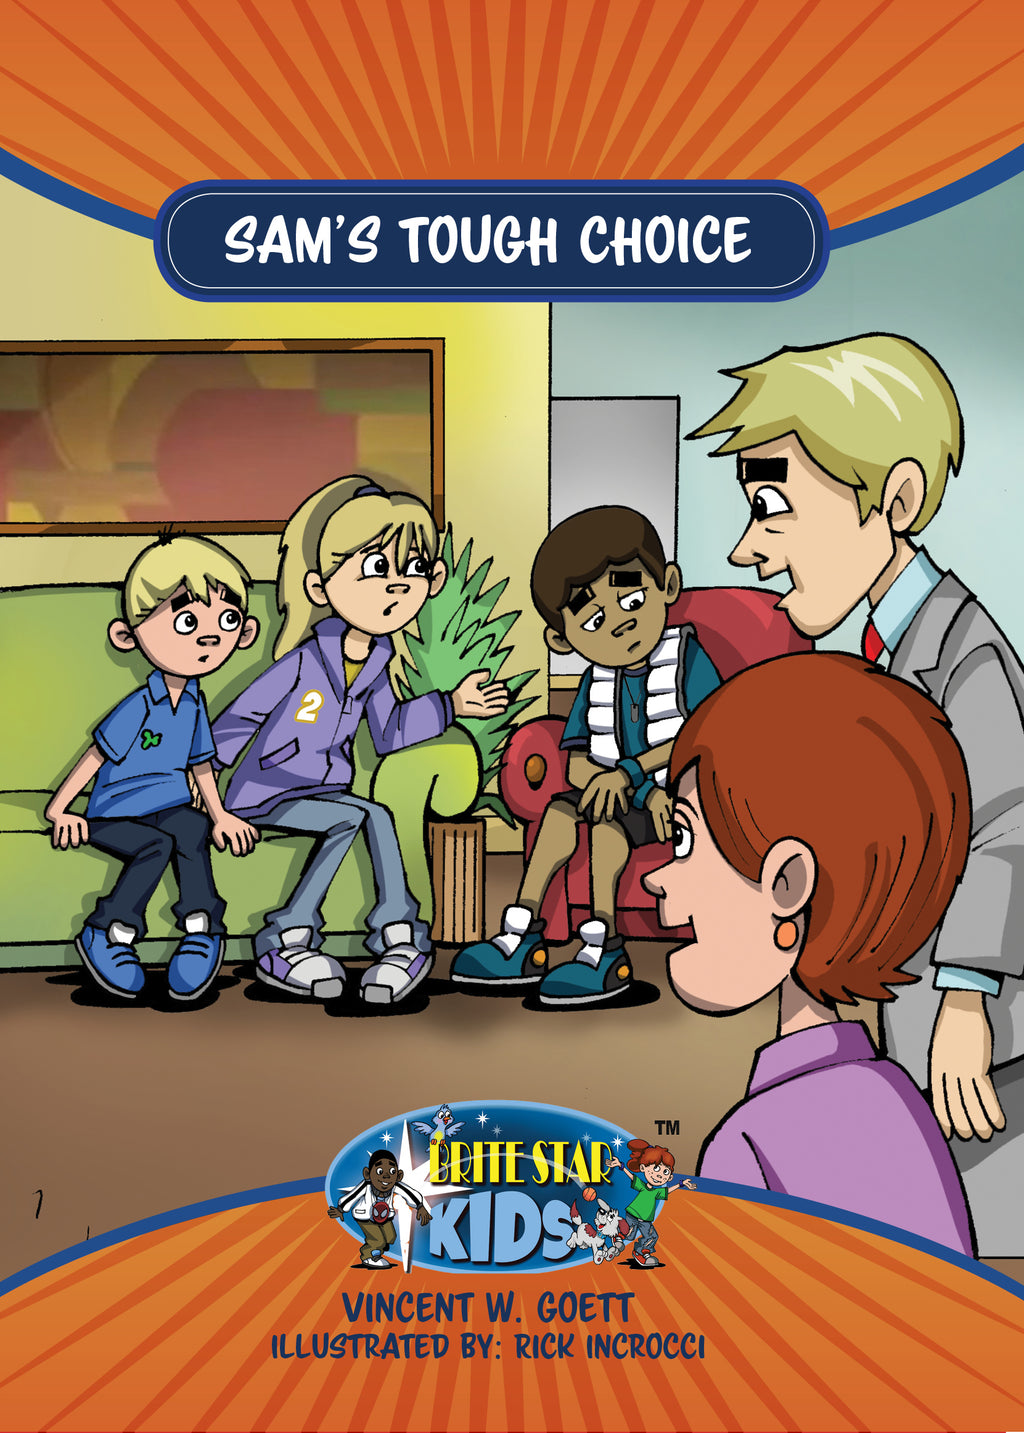 Sam S Tough Choice Plus Free Membership In The Brite Star Learning Net Brite Star Store Promoting World Education